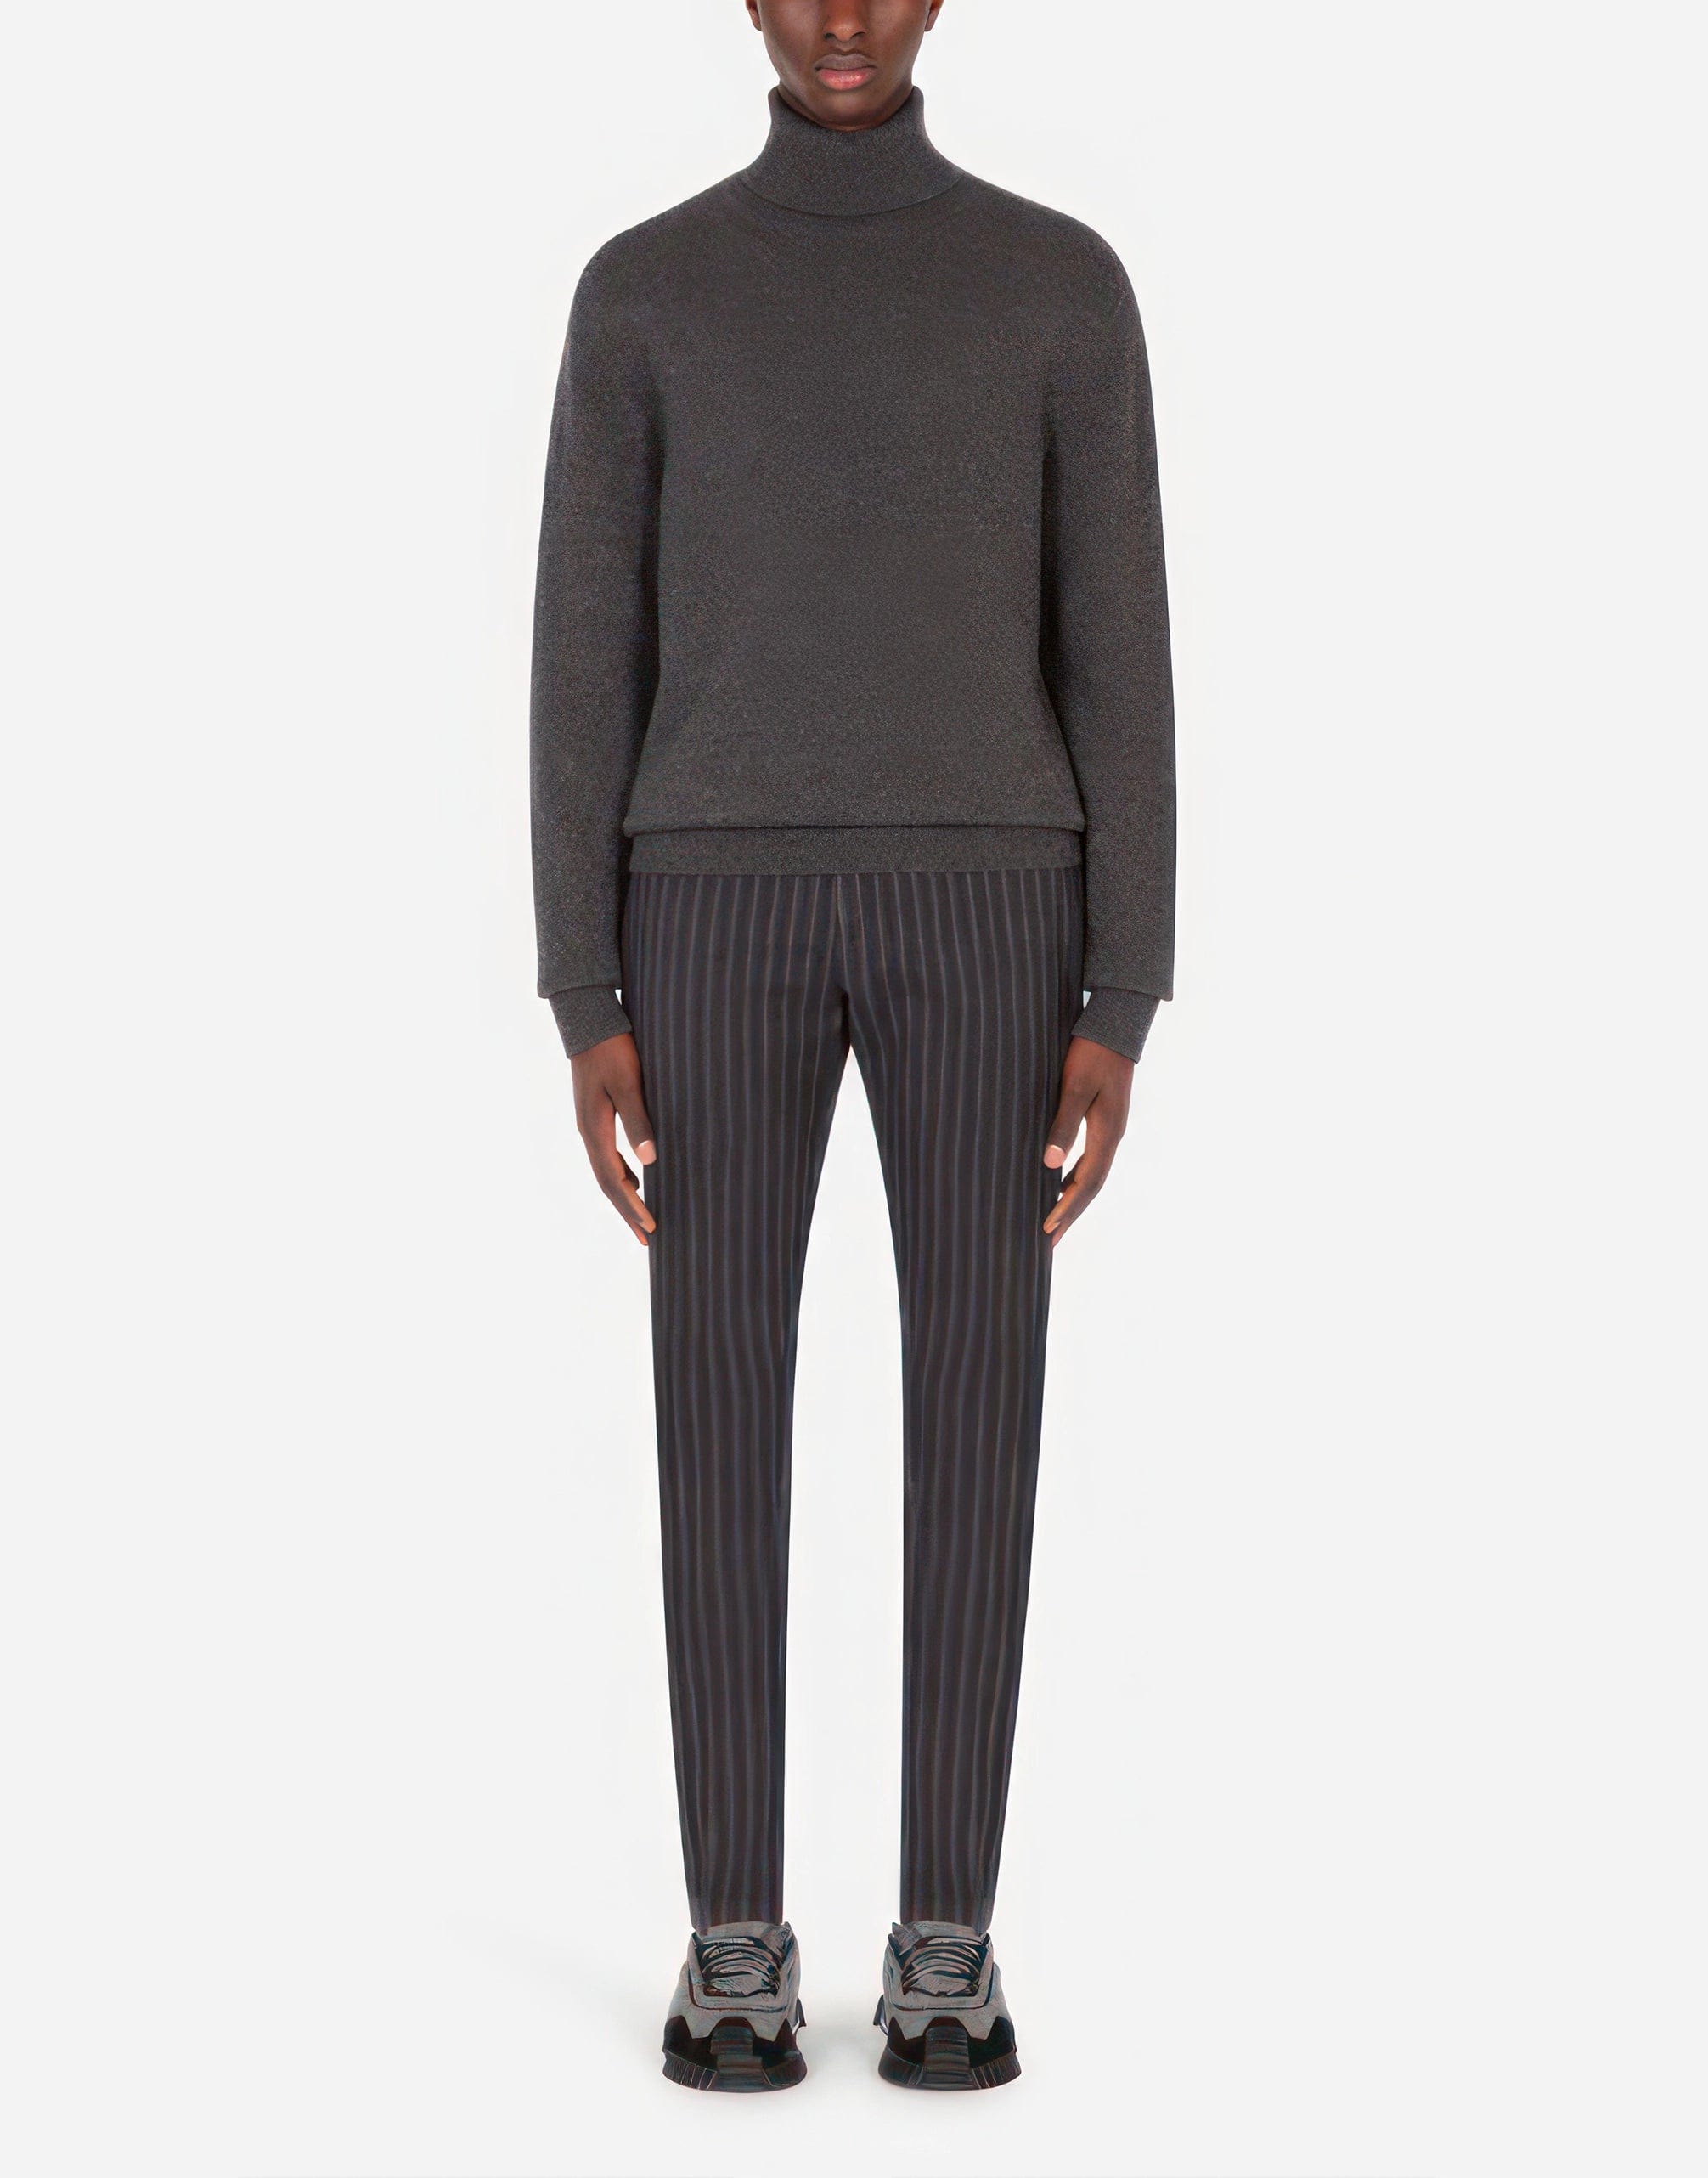 Dolce & Gabbana Striped Wool And Cotton Pants